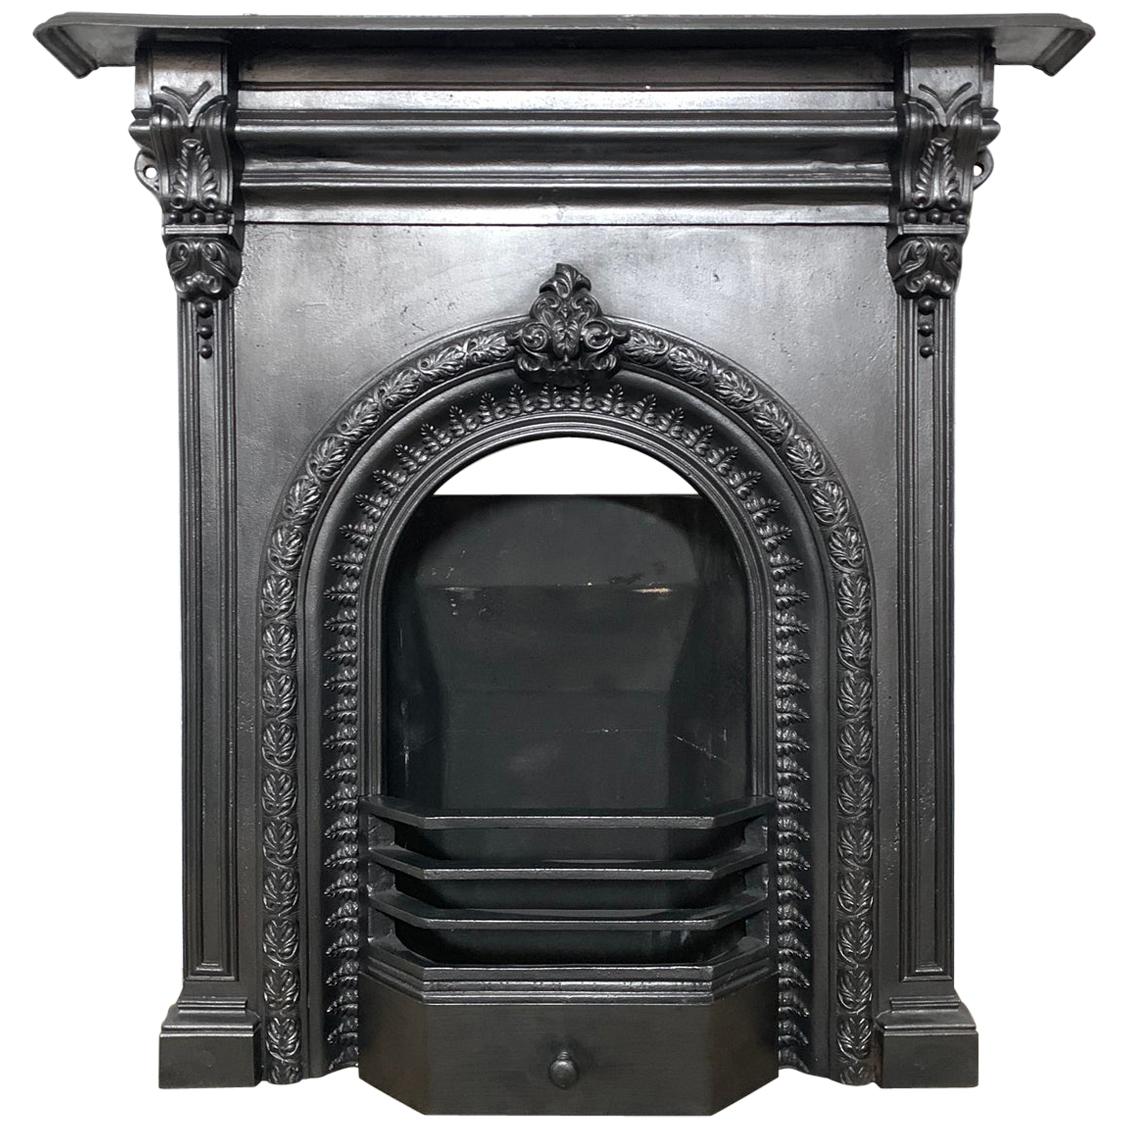 Antique Cast Iron Fireplace Best Of Antique Late Victorian Cast Iron Bination Fireplace with